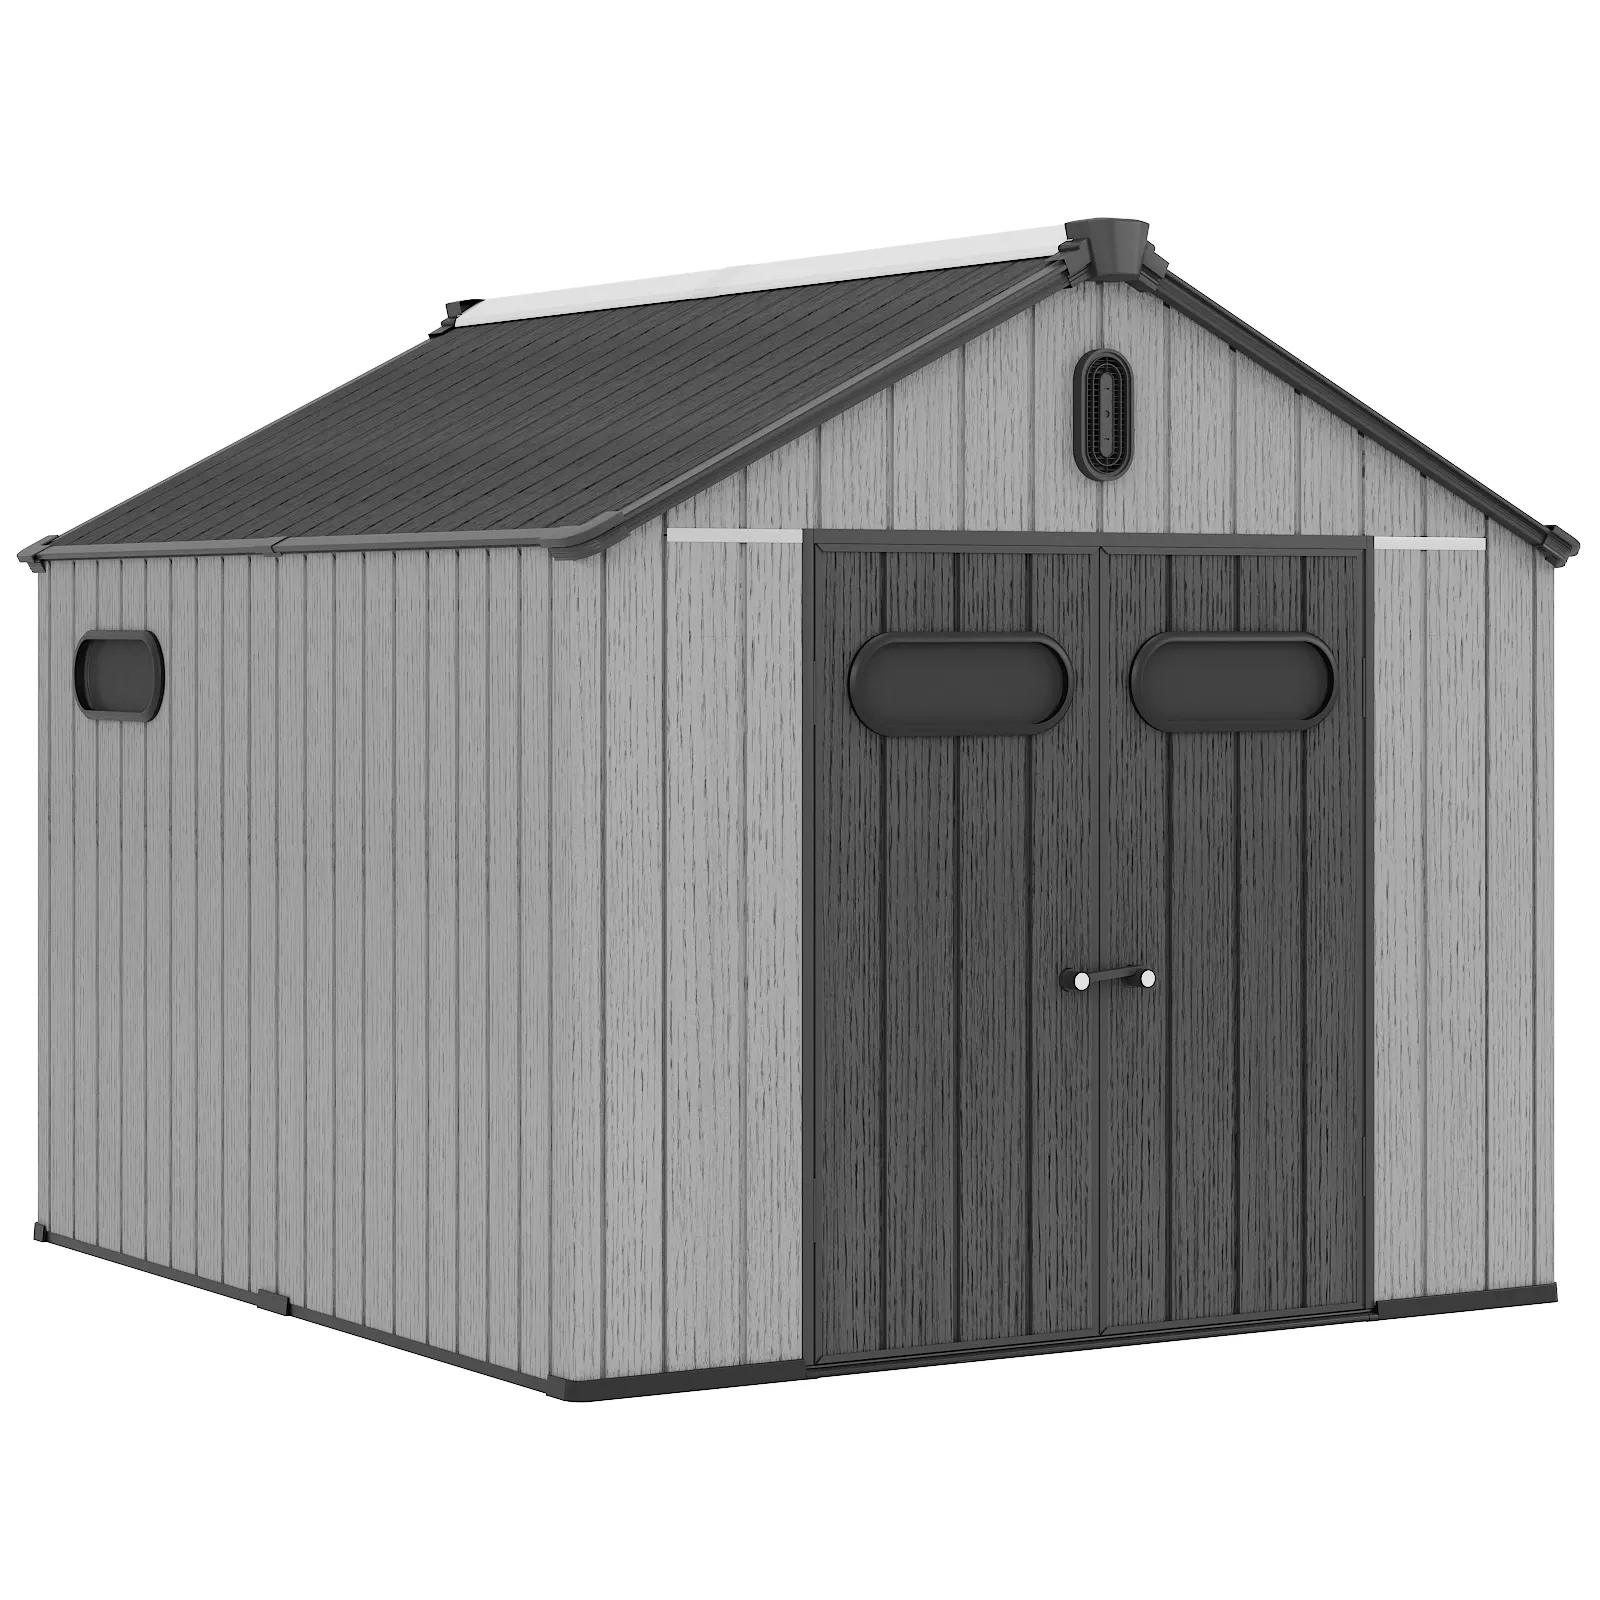 Waterproof Resin Plastic Garden Shed Outdoor Storage Cabinet for Practical   Durable Use